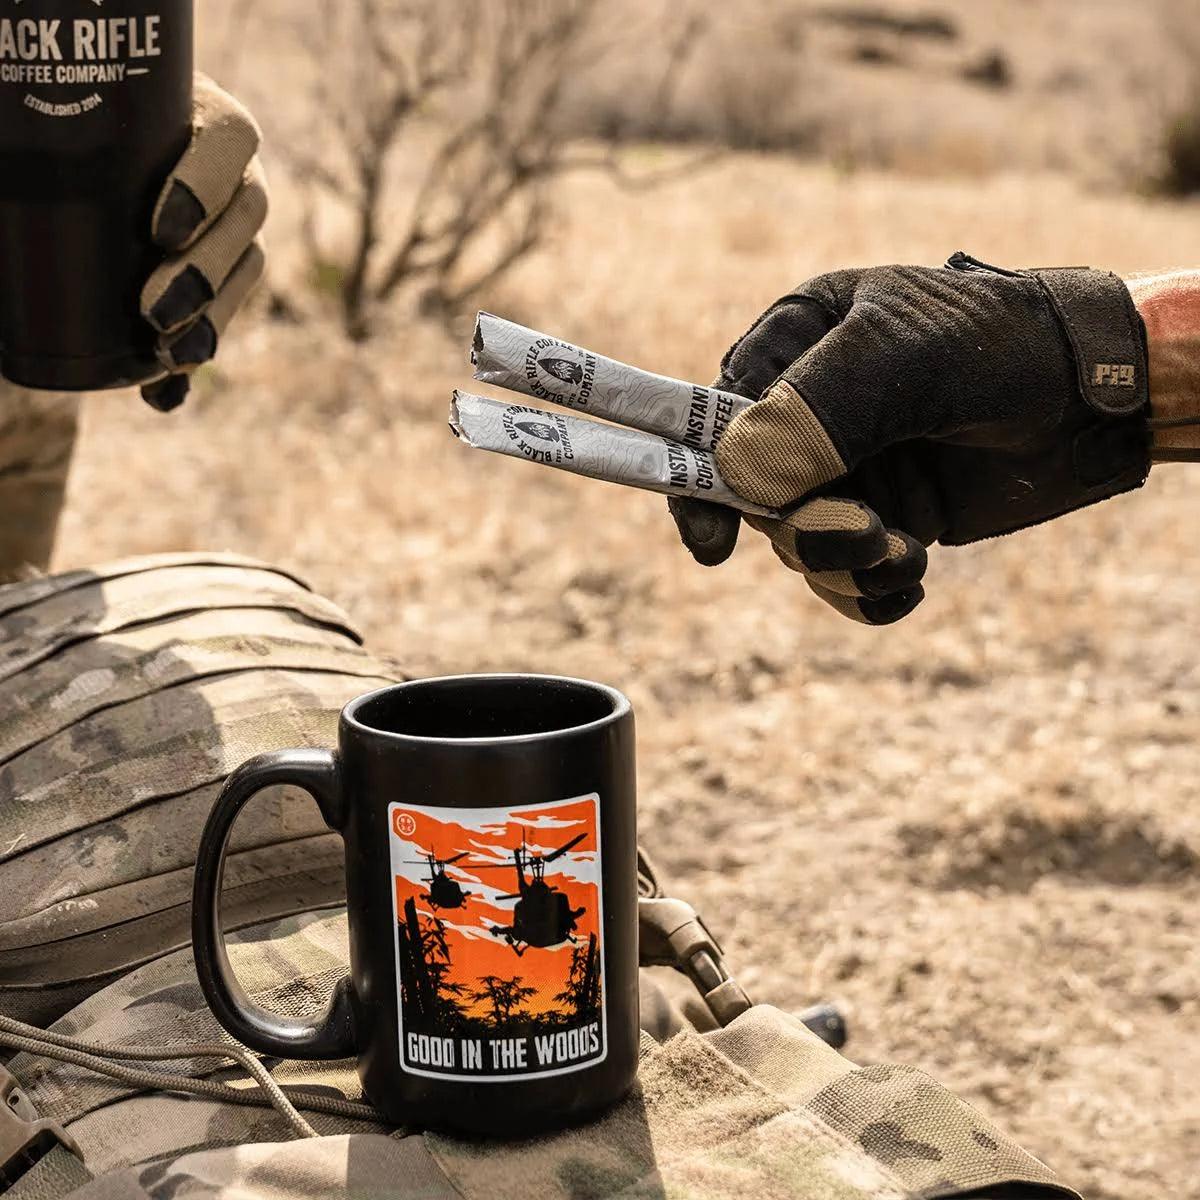 BRCC Instant Coffee 32ct - Purpose-Built / Home of the Trades